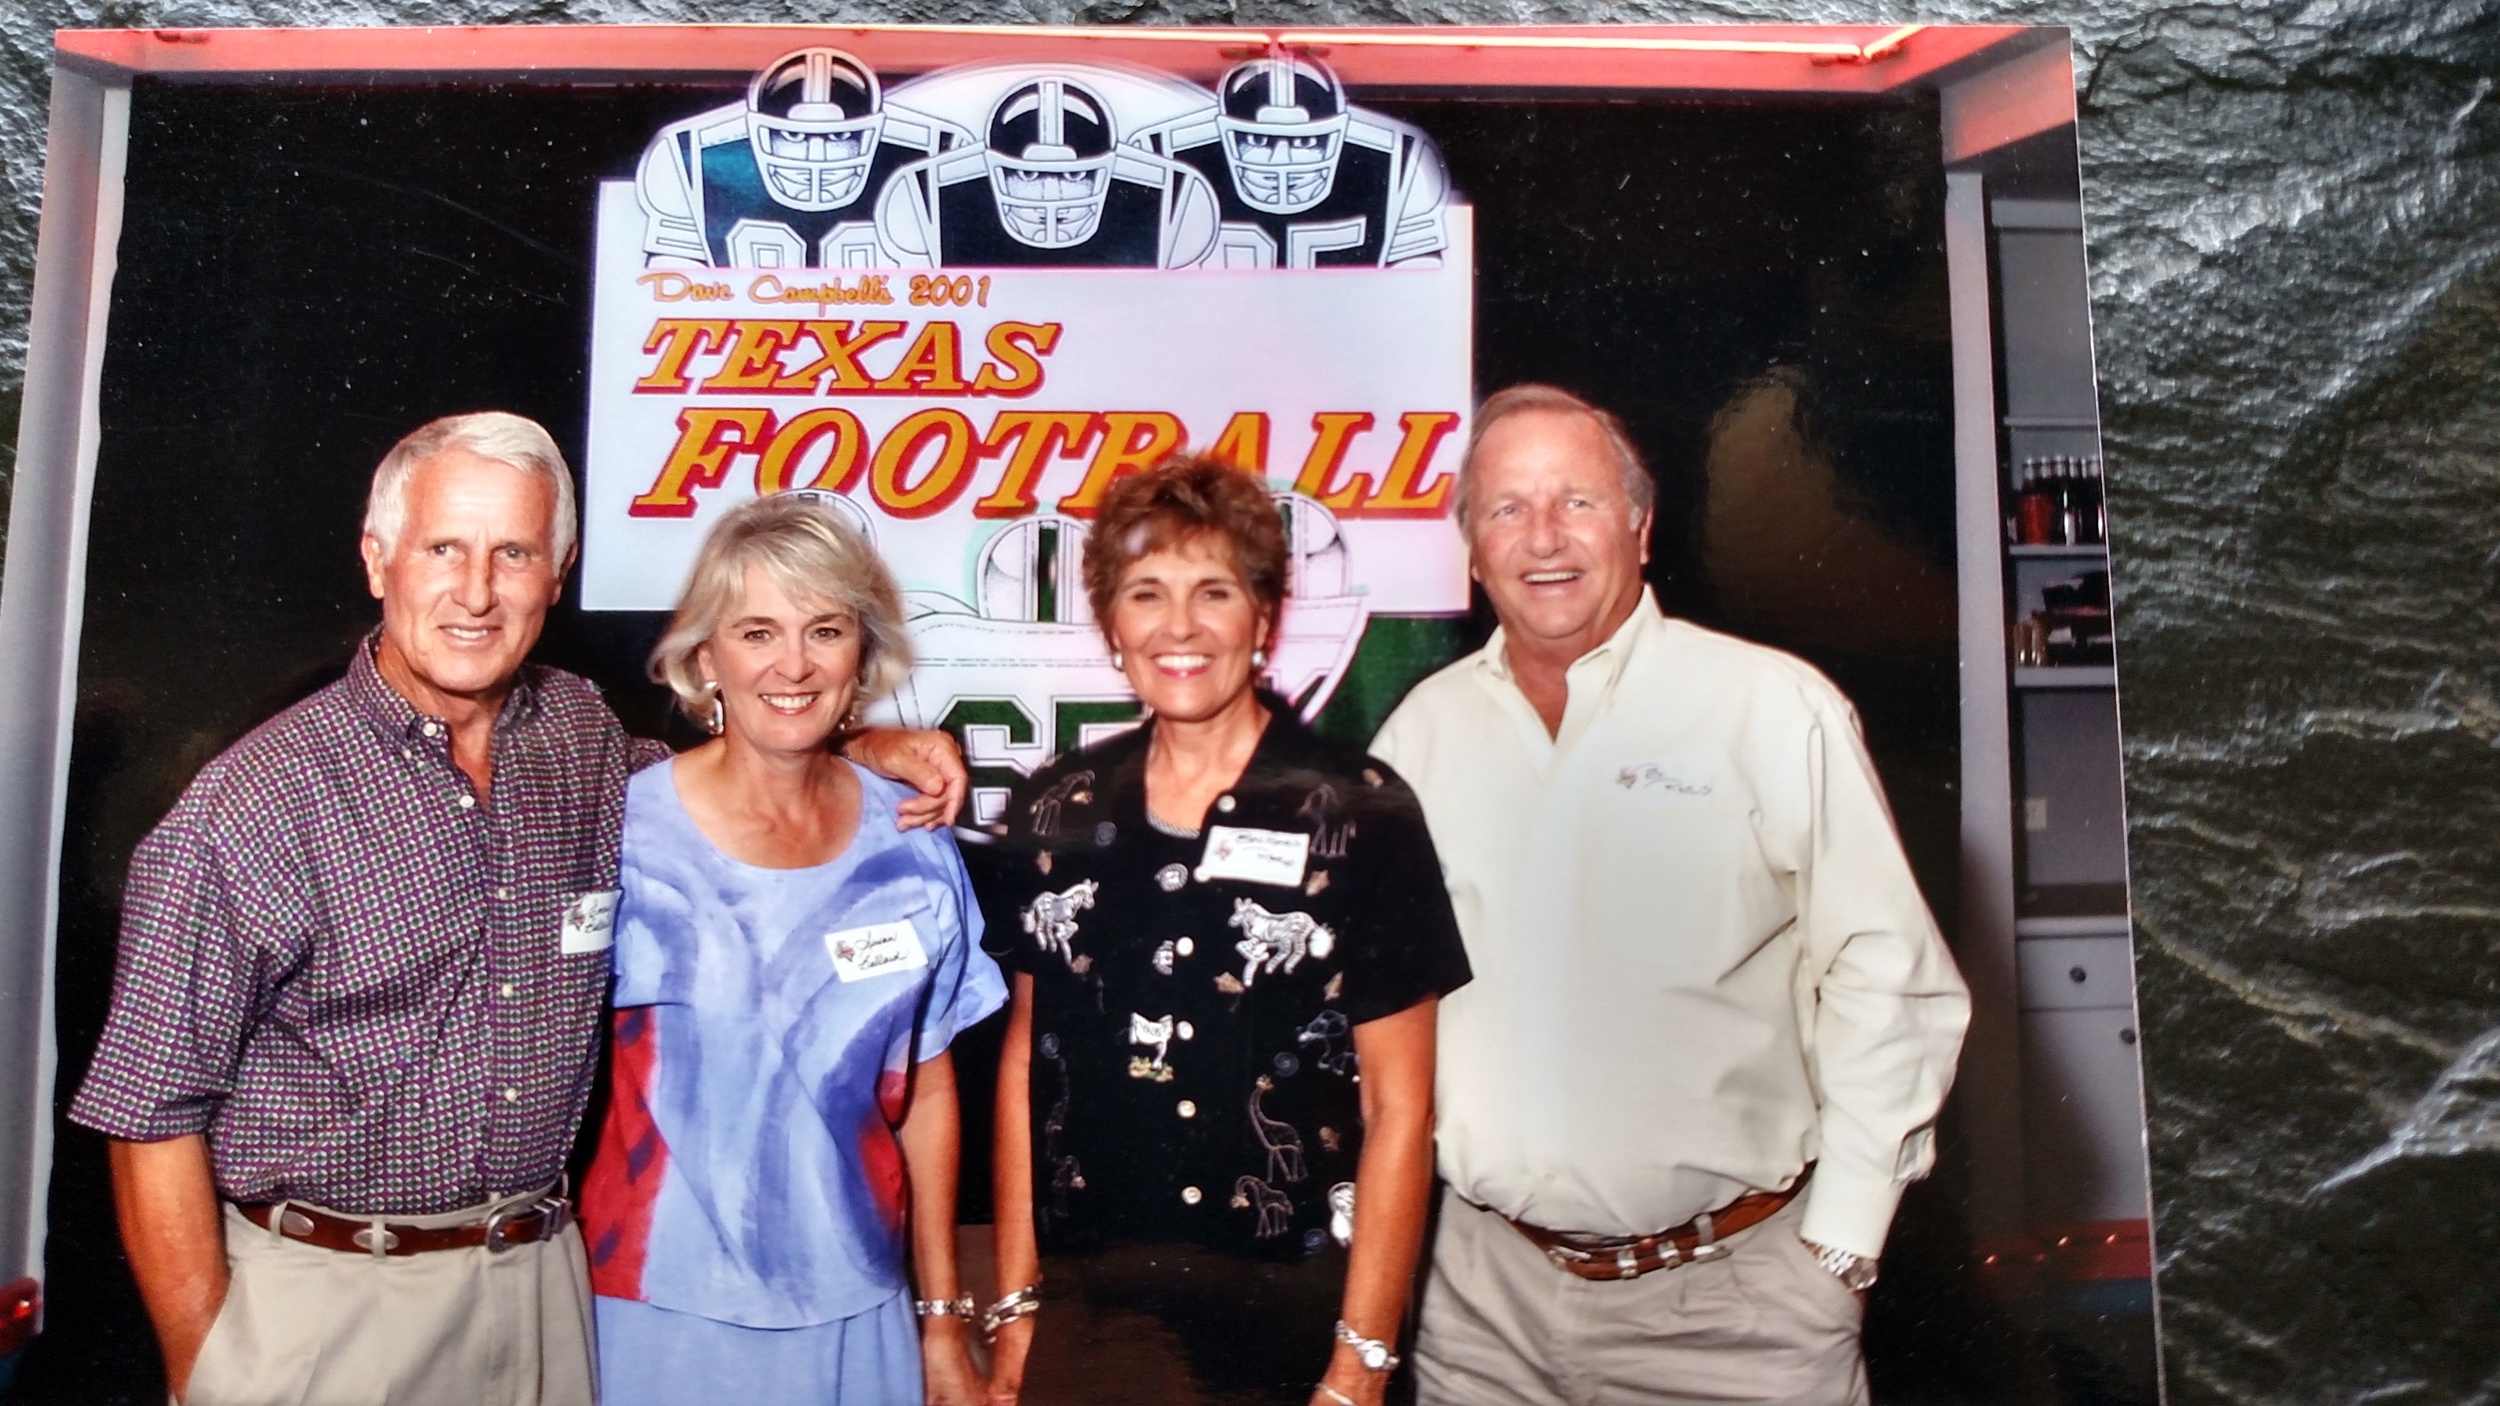 2001 Coach is honored by Dave Campbell Texas Football